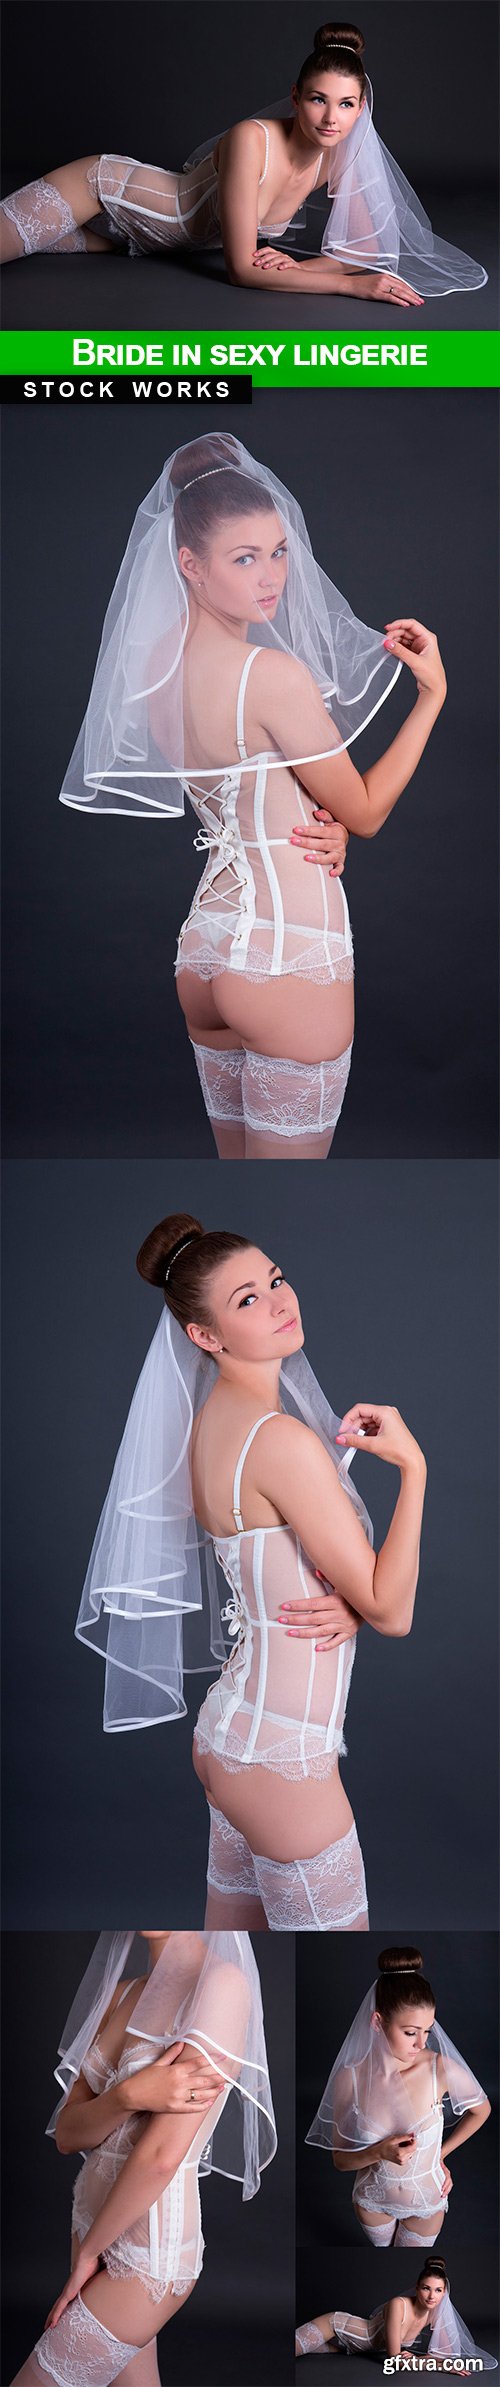 Bride in sexy lingerie - 5 UHQ JPEG